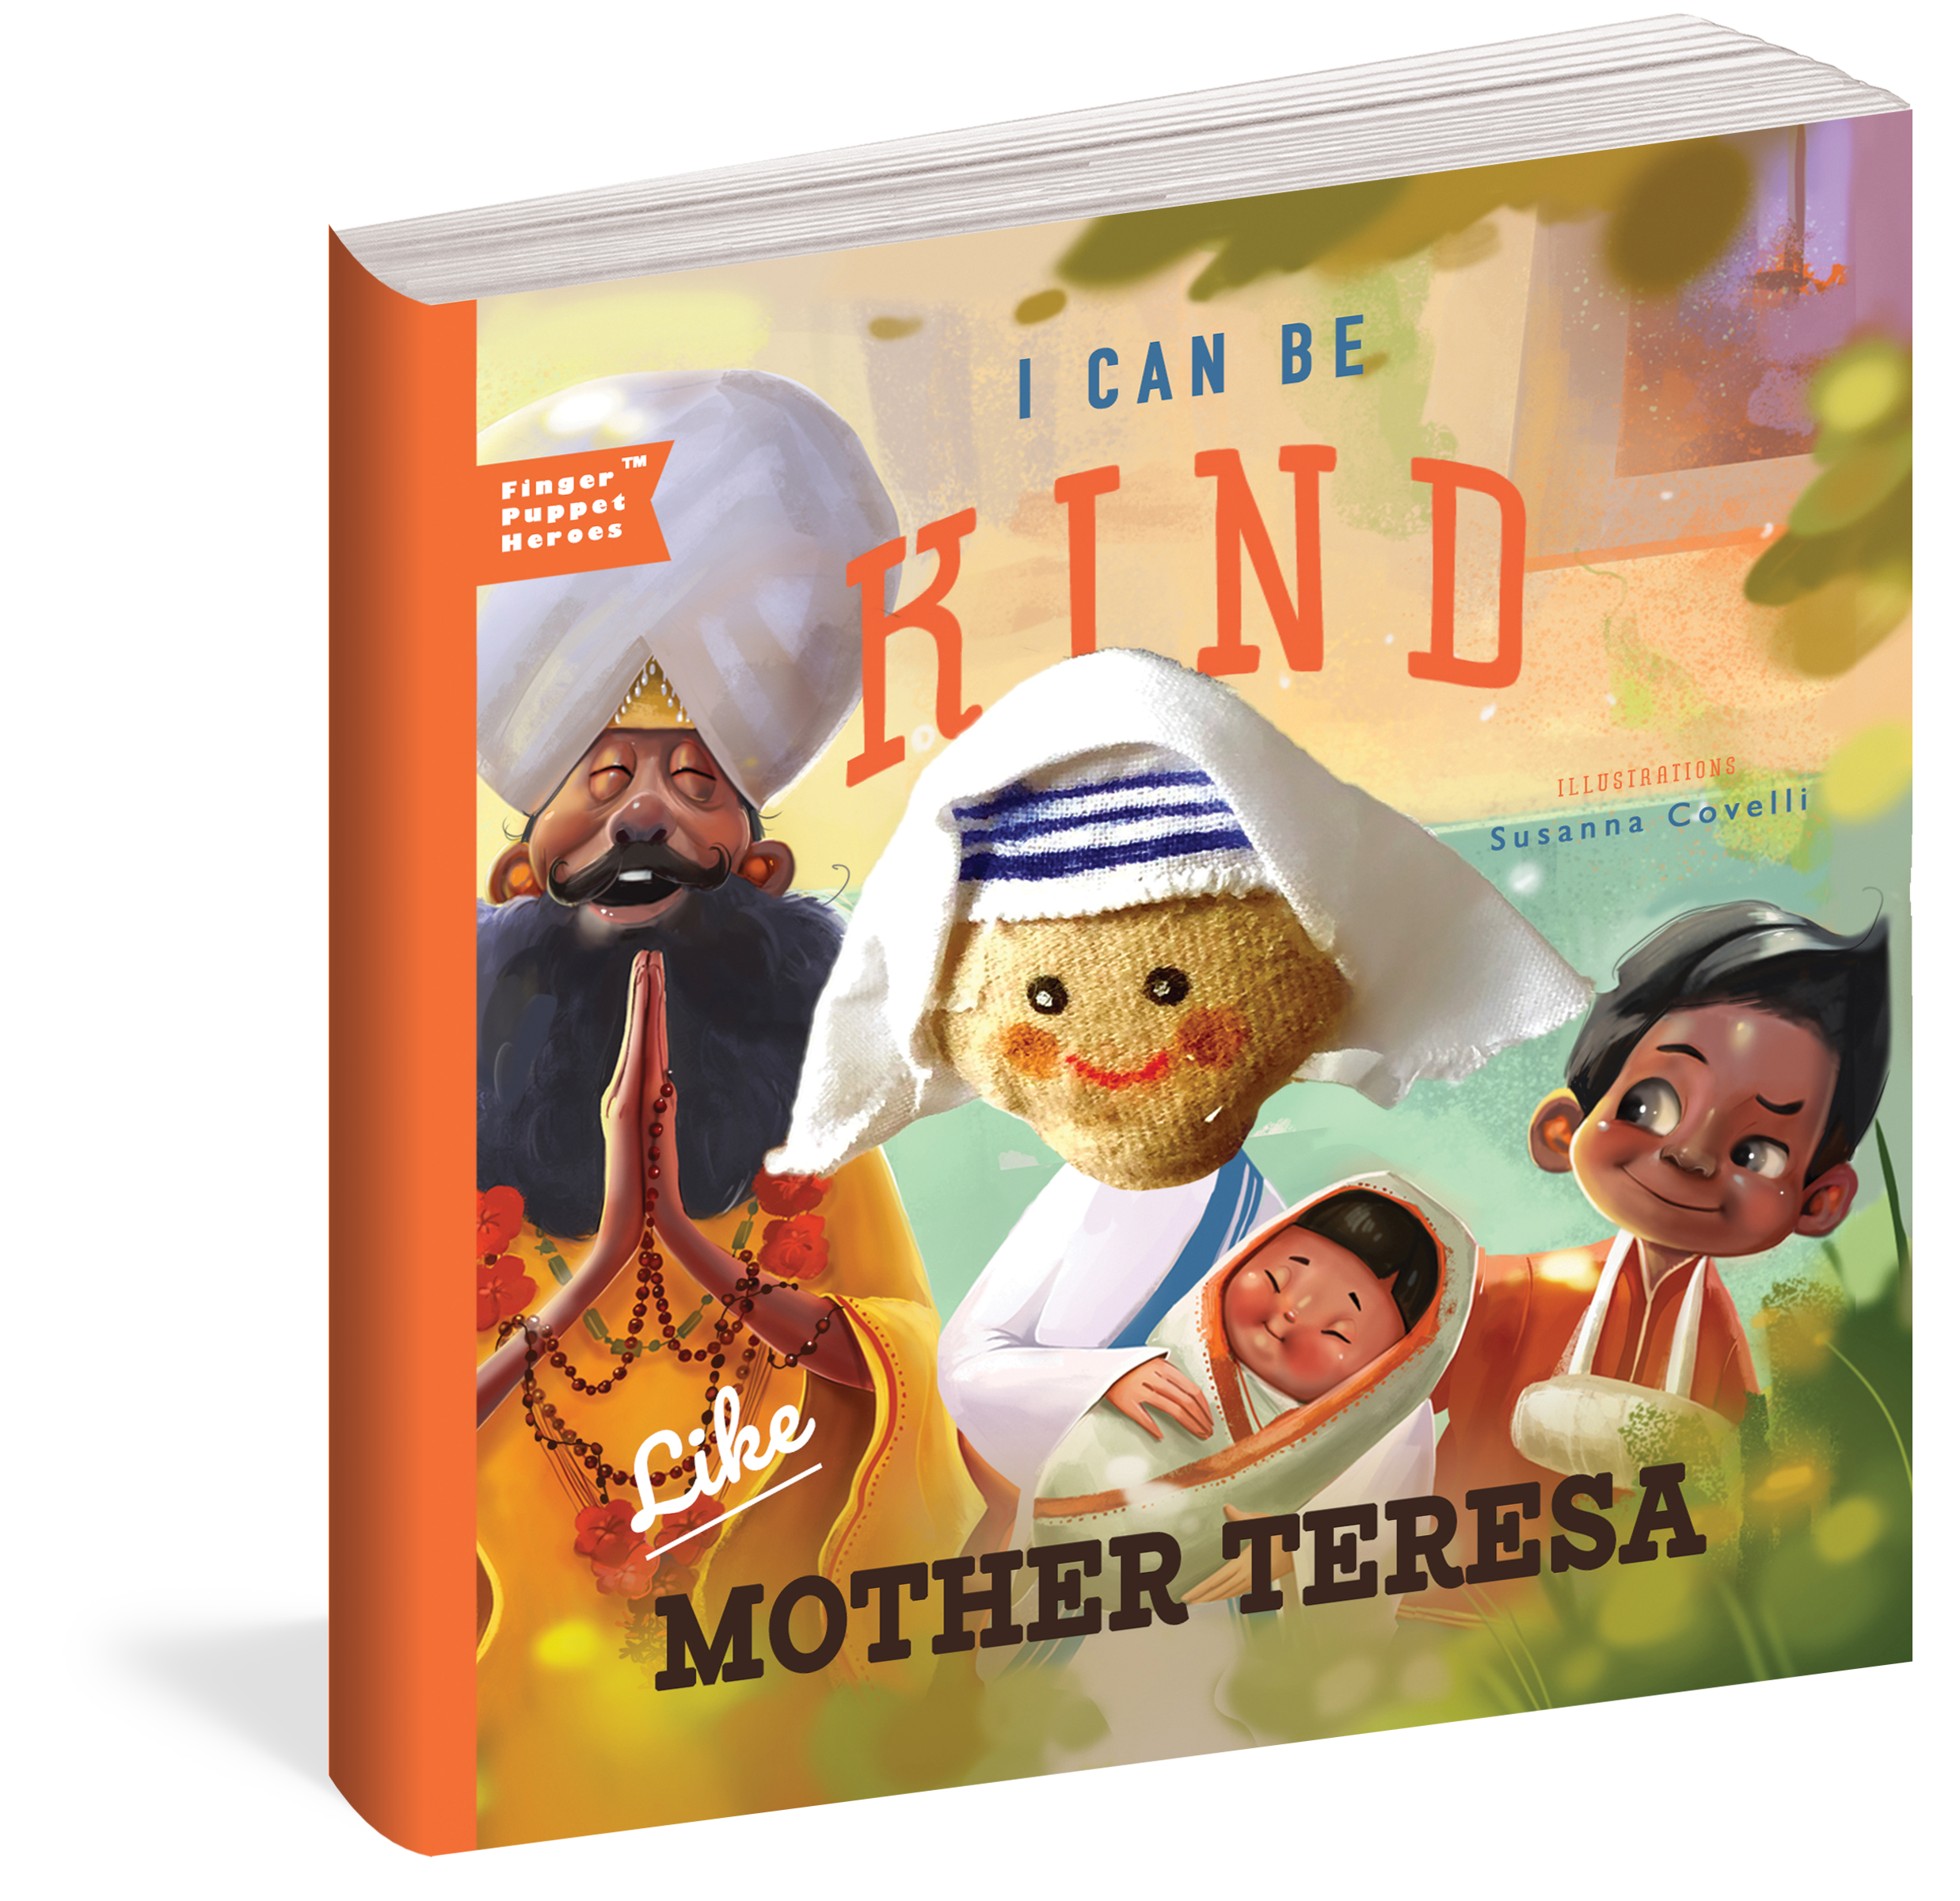 The cover of the board book I Can Be Kind Like Mother Teresa.